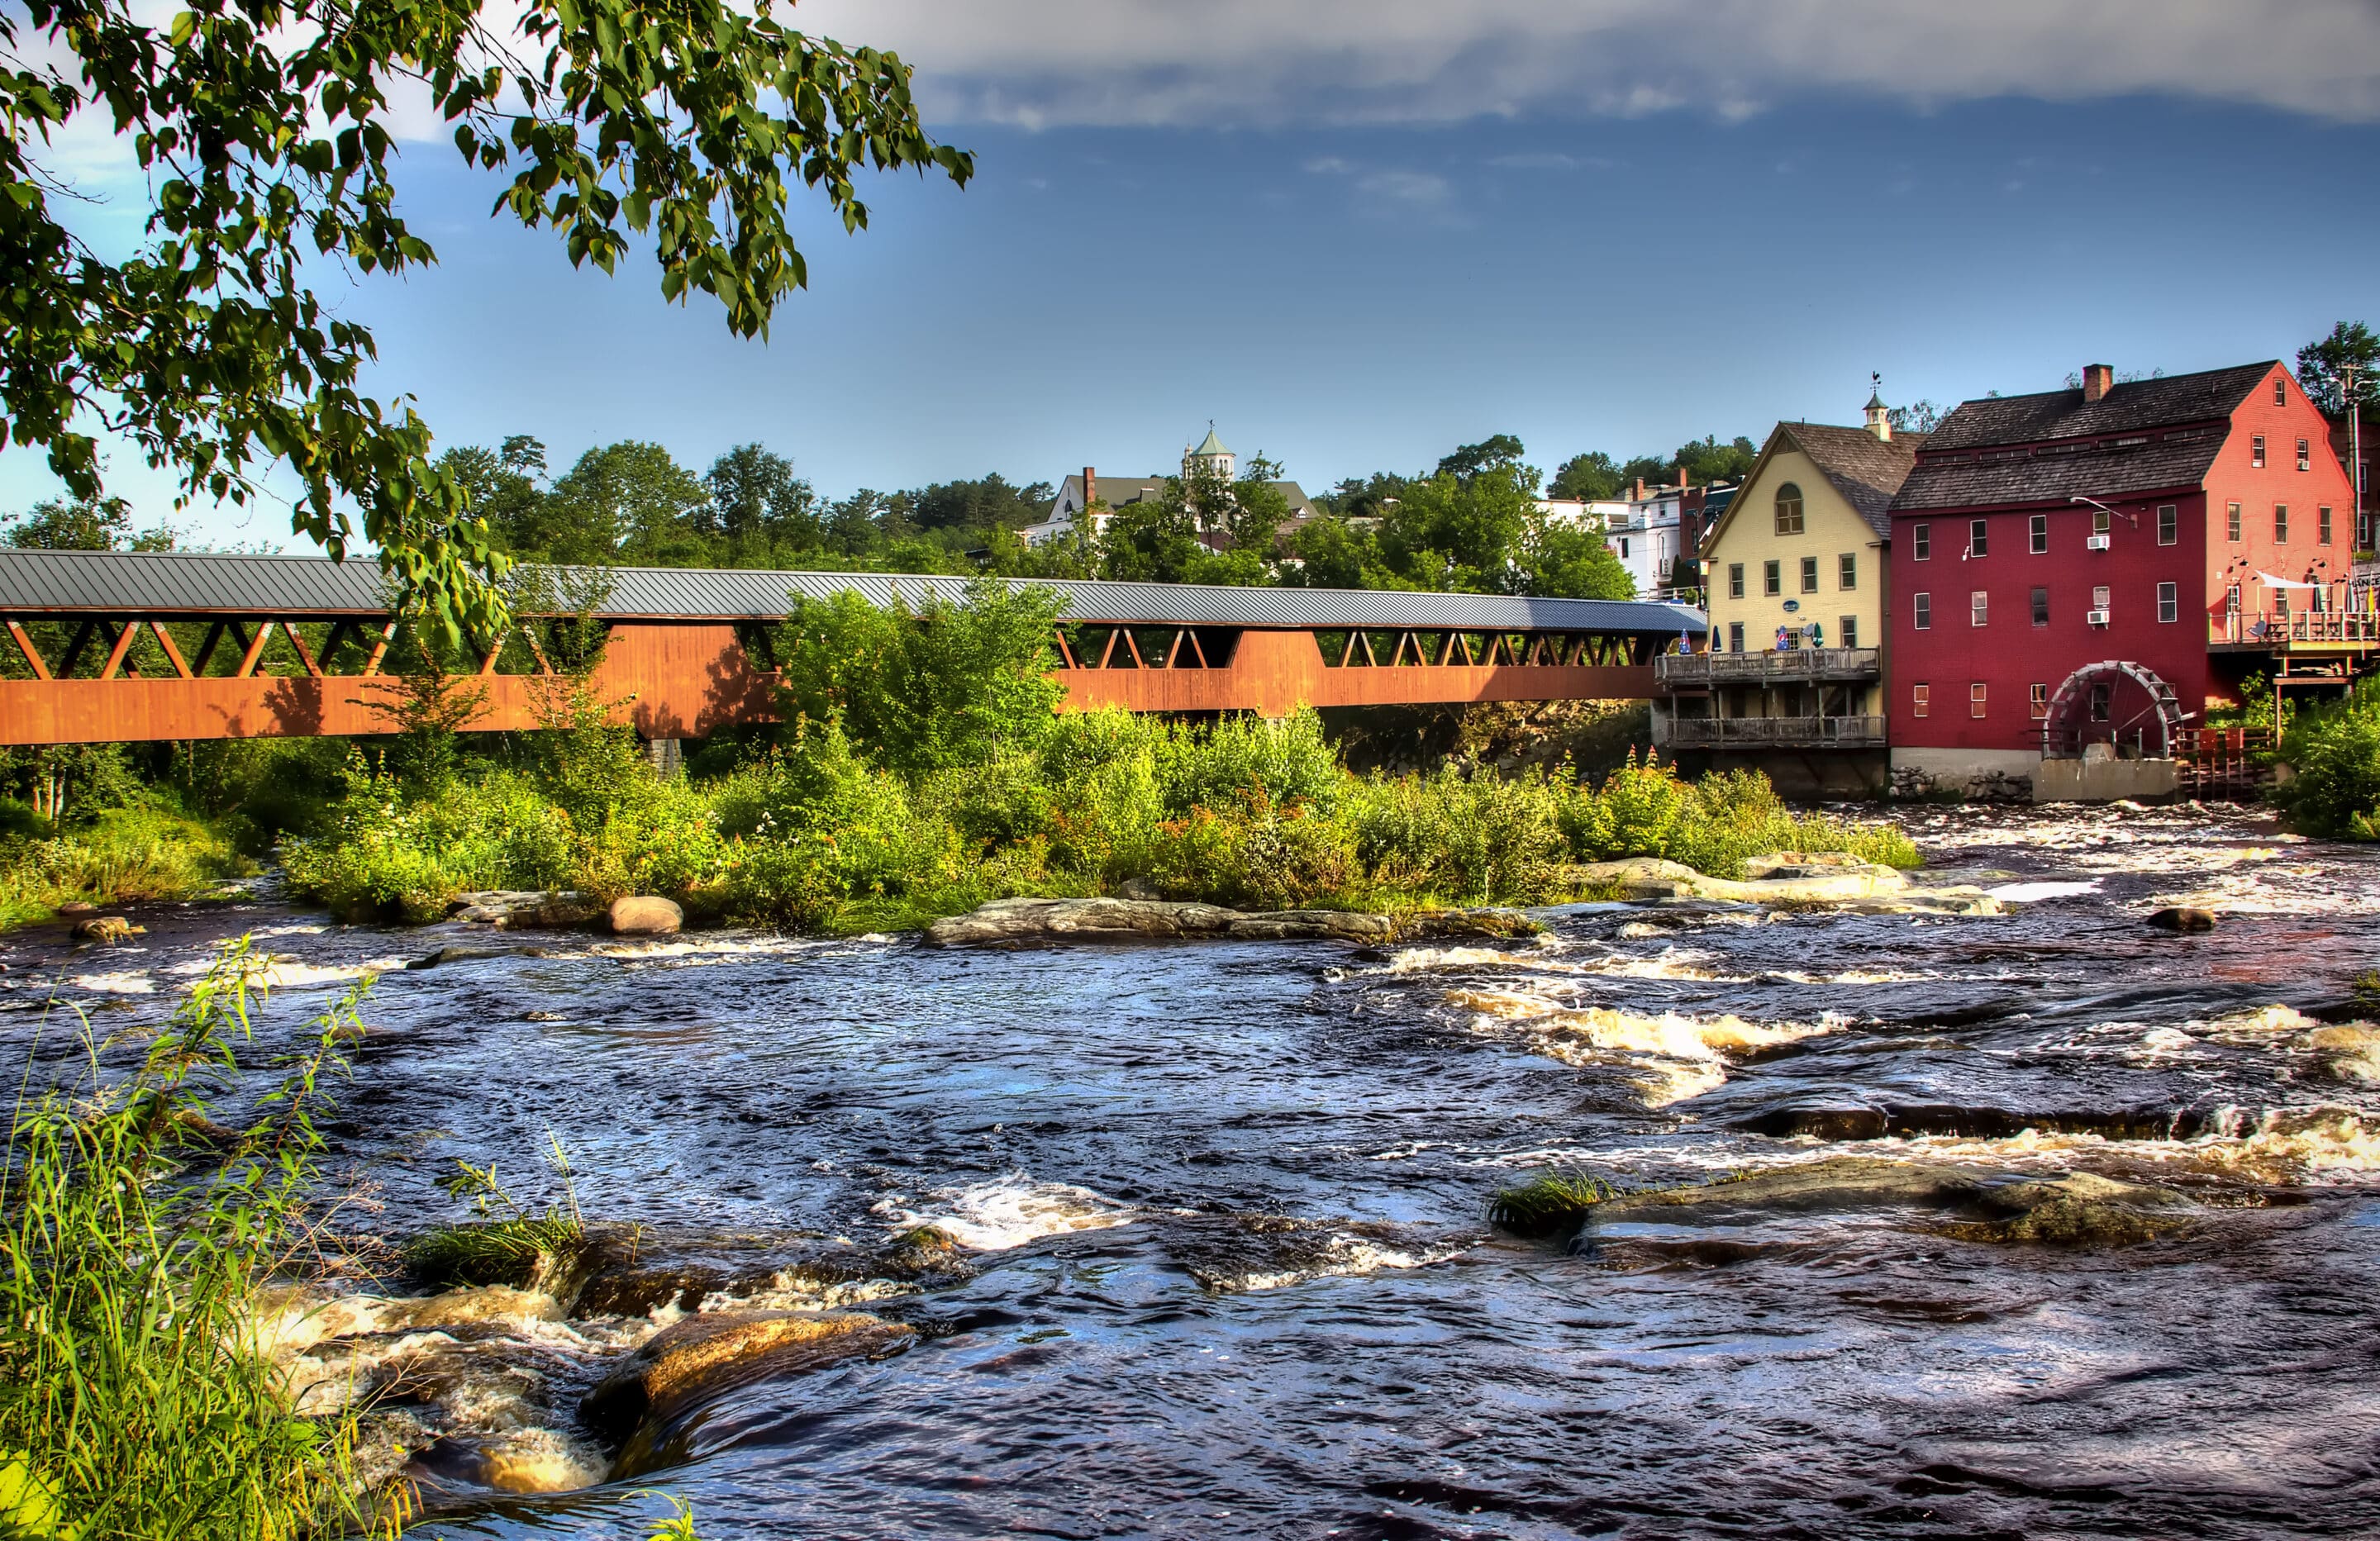 Bridge over the Ammonoosuc River with a grist mill and foliage, blue skies, and a view of Littleton, NH in the distance.